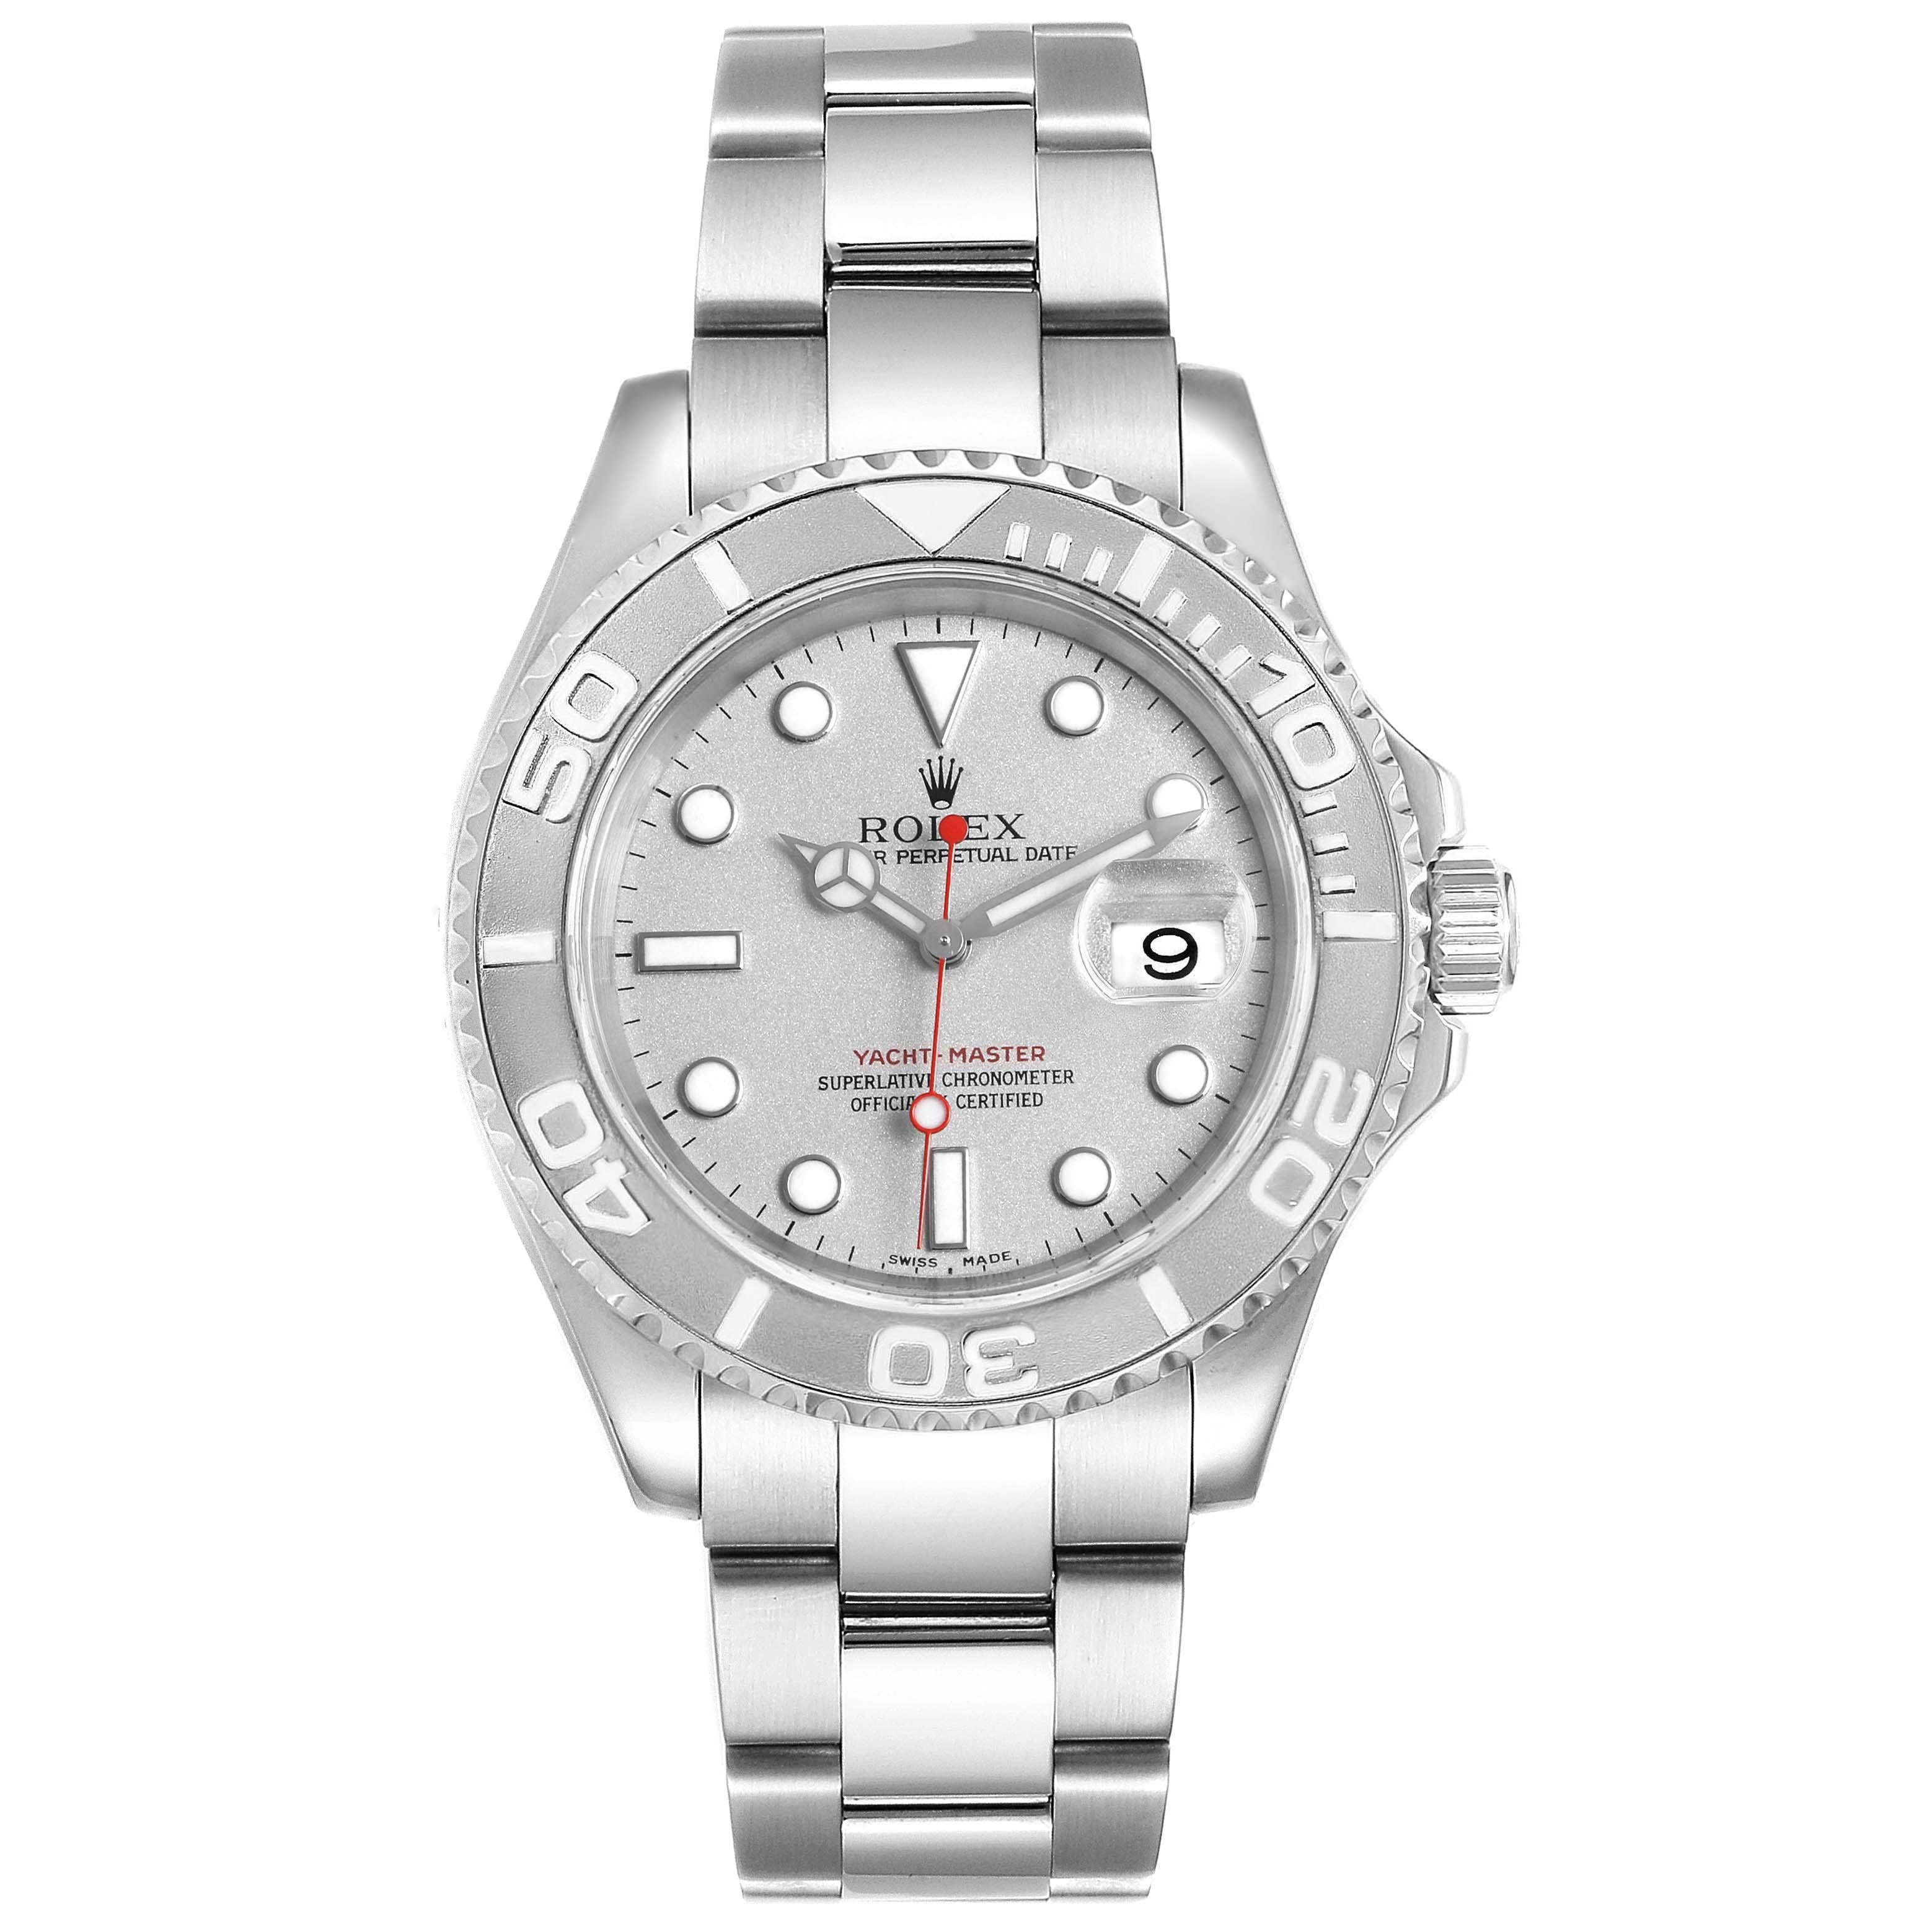 Rolex Yachtmaster 40mm Steel Platinum Mens Watch 16622 Box Papers. Officially certified chronometer self-winding movement. Stainless steel case 40.0 mm in diameter. Rolex logo on a crown. Platinum special time-lapse unidirectional rotating bezel.